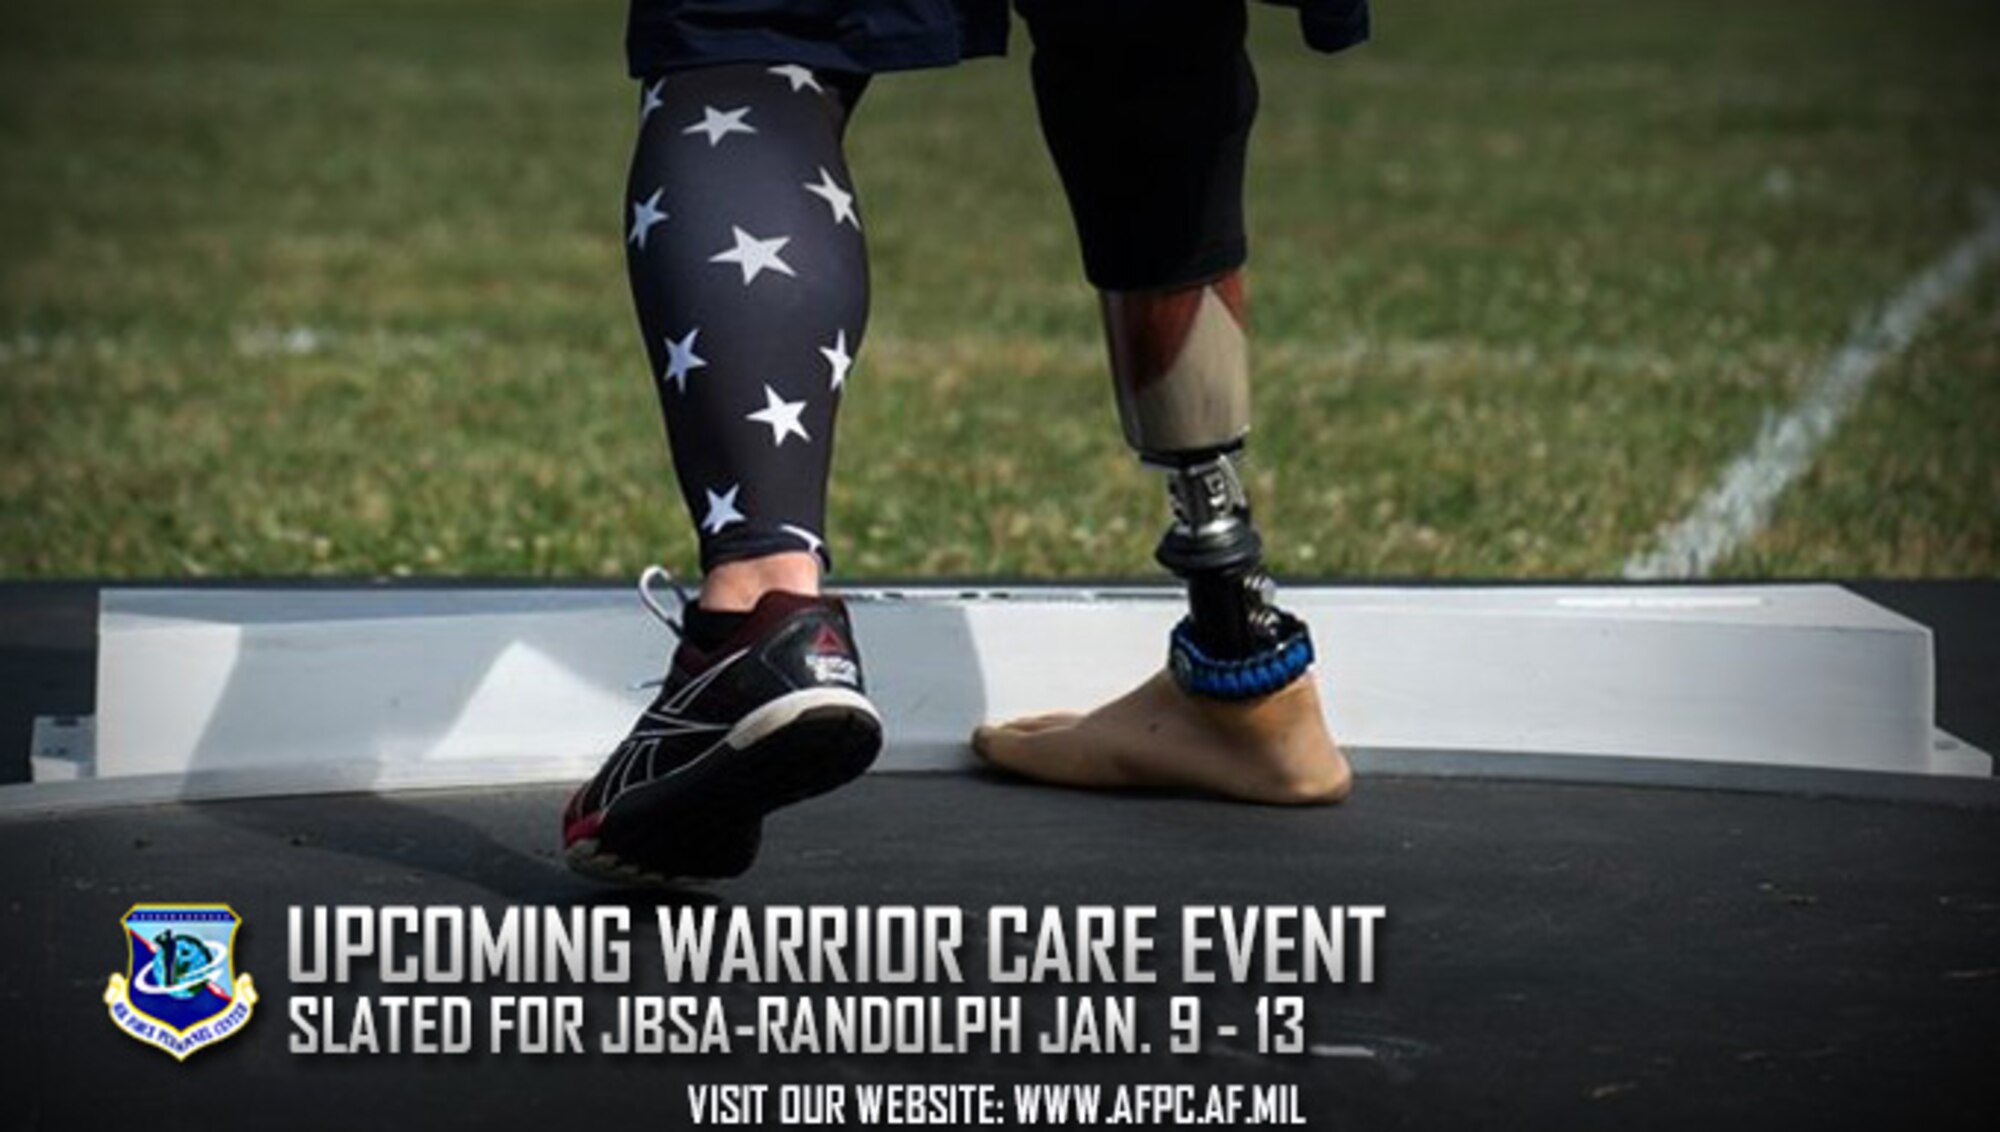 The Air Force Wounded Warrior Program will host a Warrior CARE Event Jan. 9 -13 at JBSA-Randolph where about 120 wounded, ill or injured service men and women from across the nation are expected to participate.  (U.S. Air Force courtesy photo)